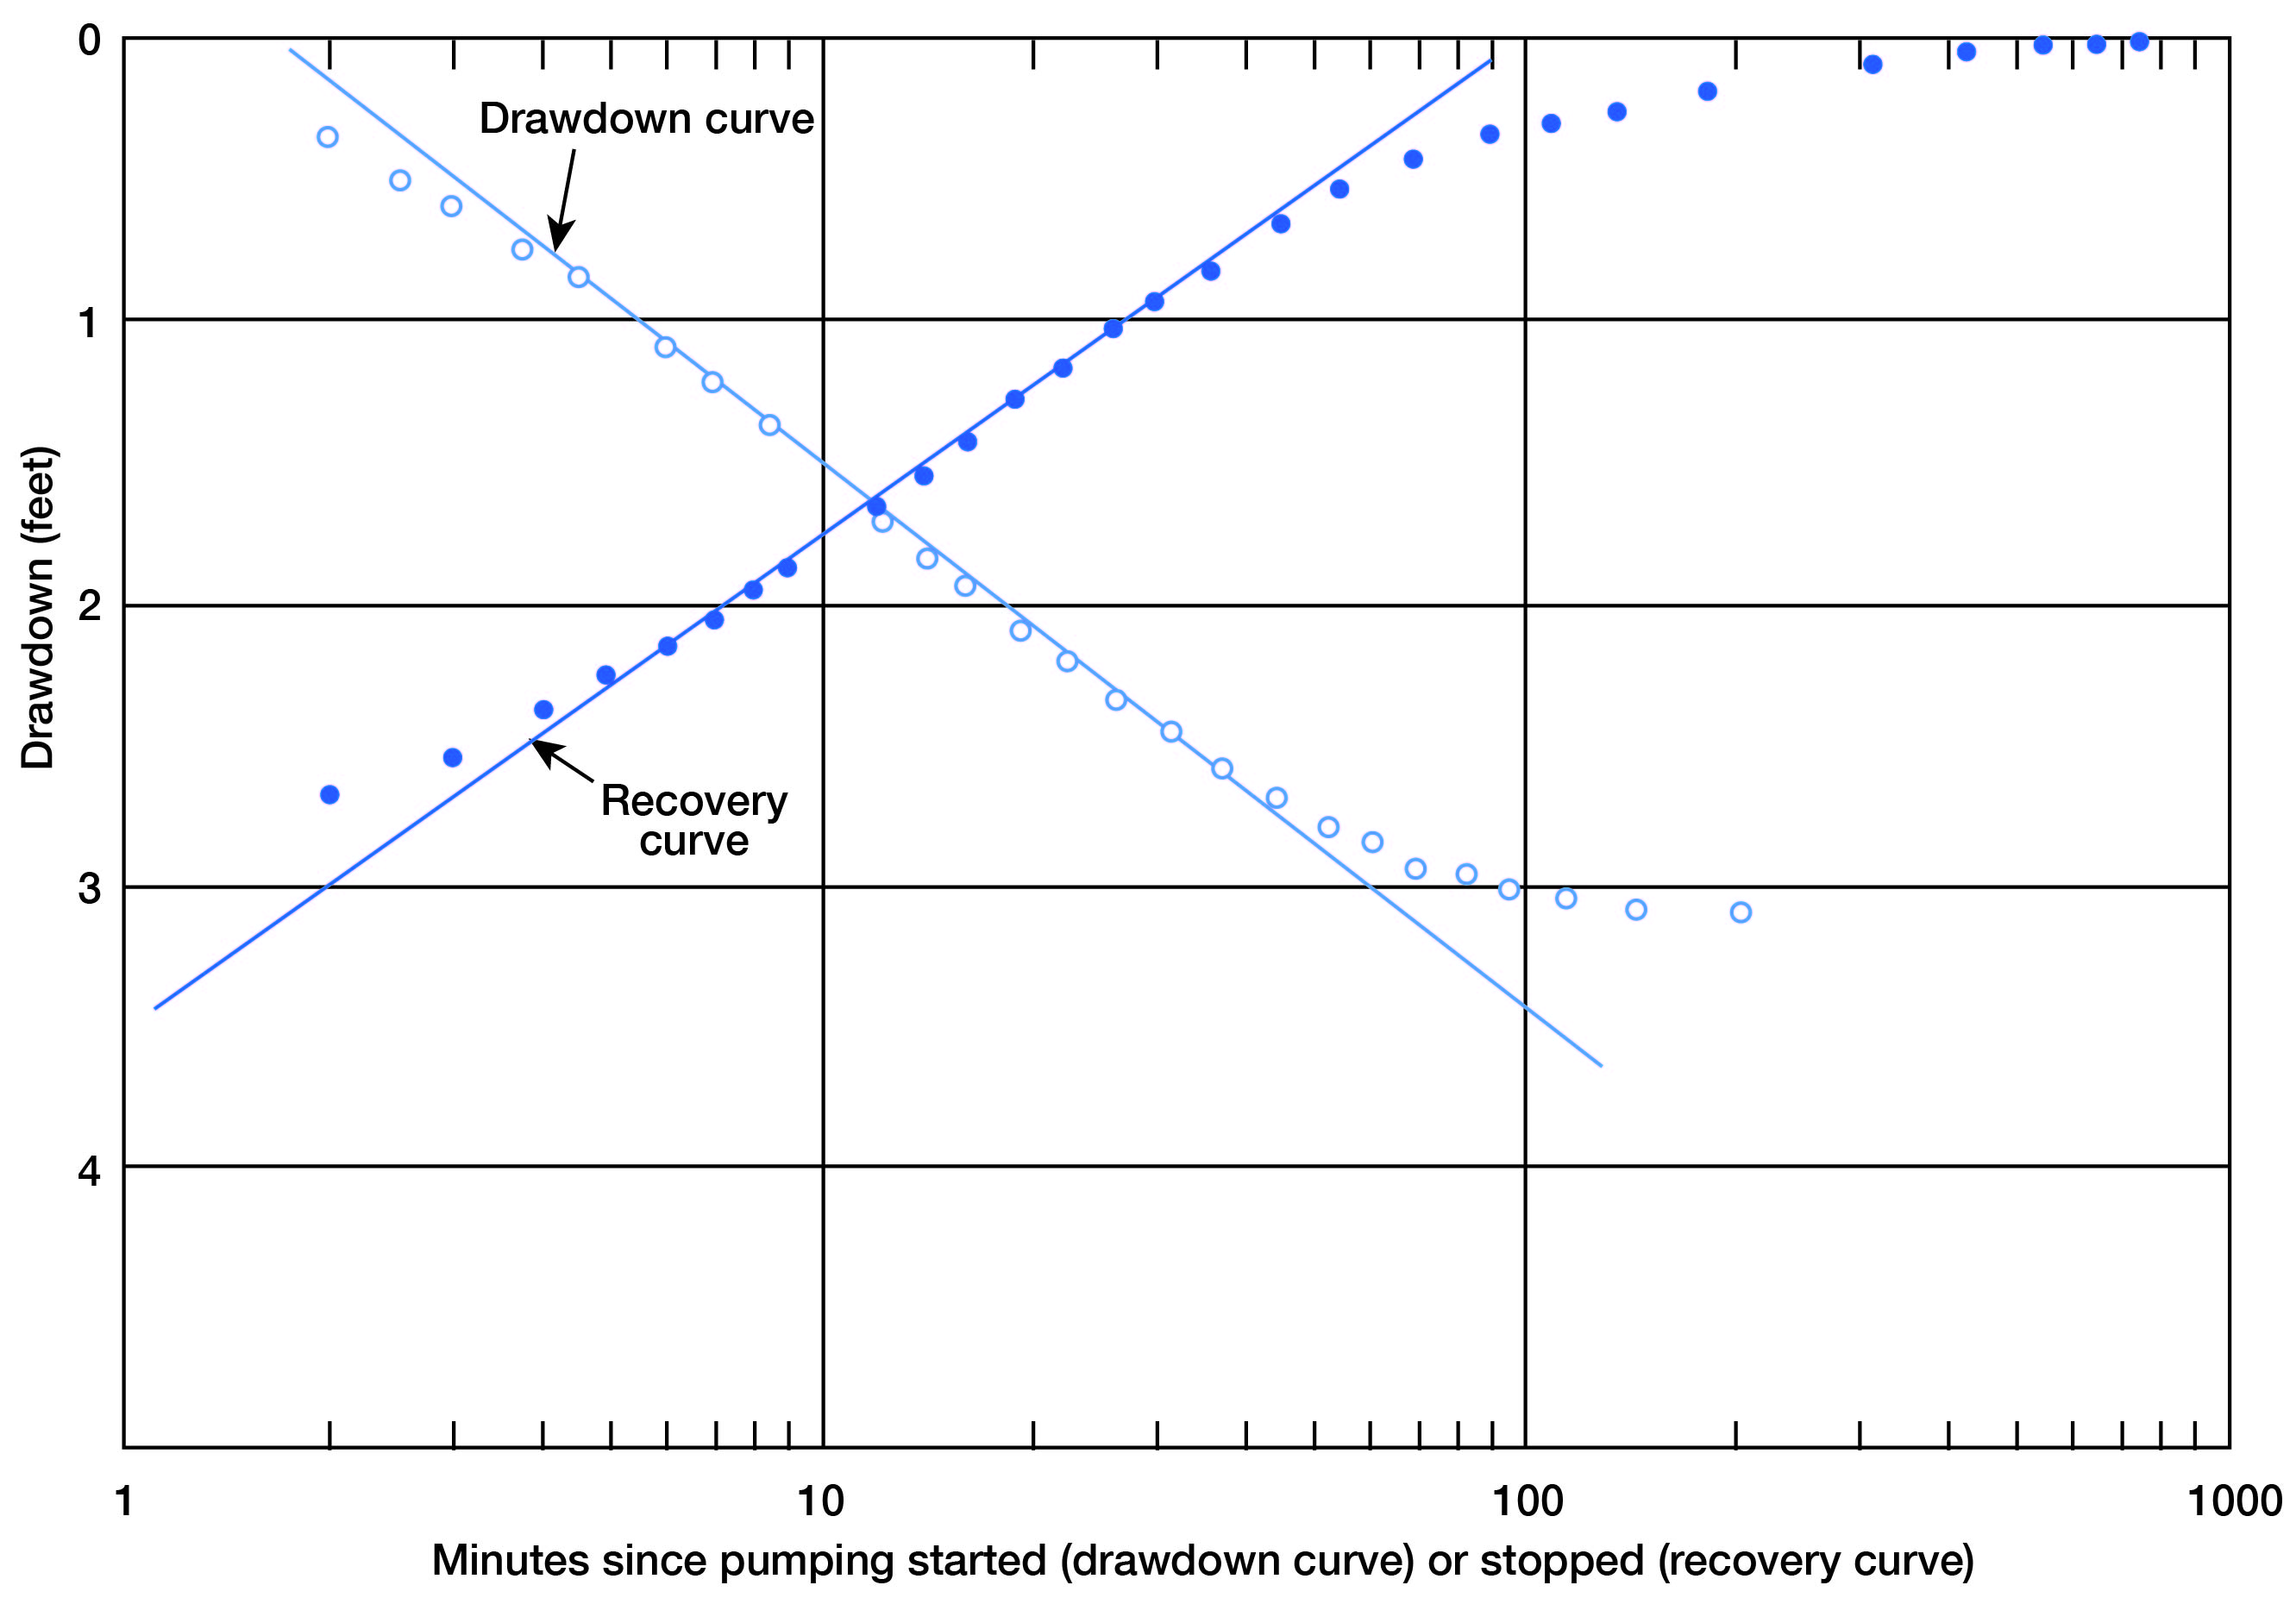 Recovery curve plotted against log(time) straightens after 4-5 minutes, rate flattens after 70 minutes; drwdown curve pretty straight from start, flatens out after 20-30 minutes.